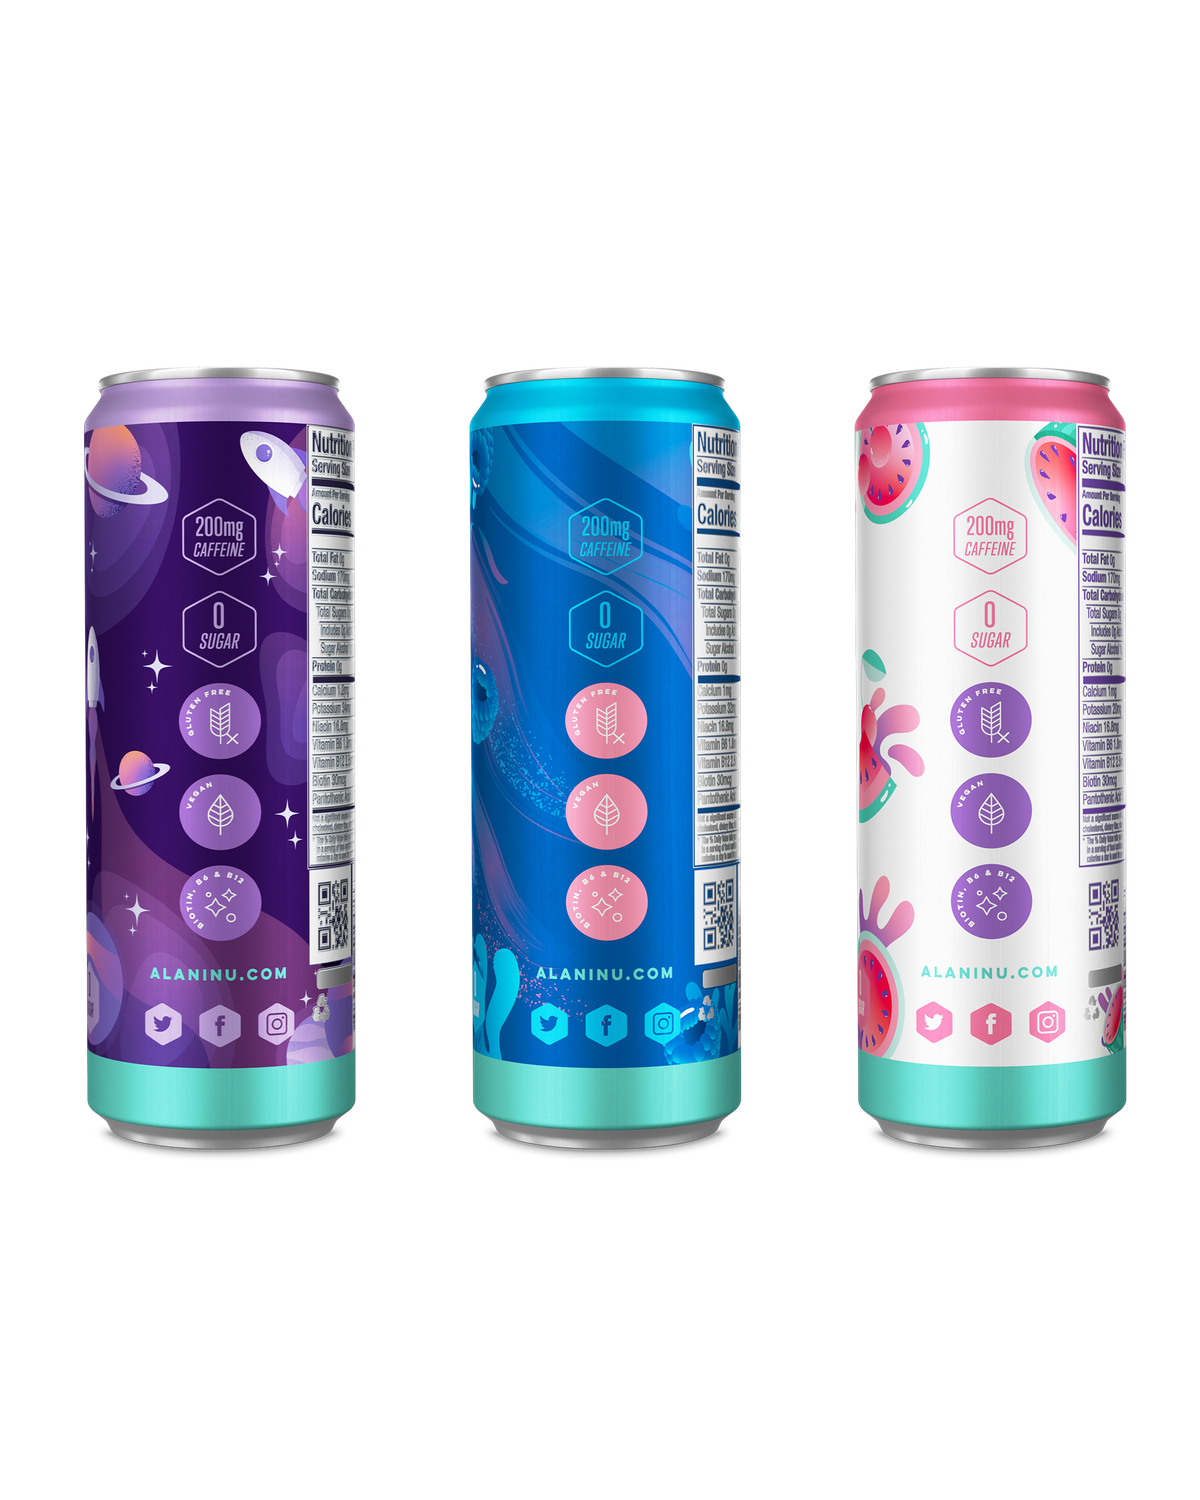 A side view of energy drinks in Fruit Blast showcasing product details.